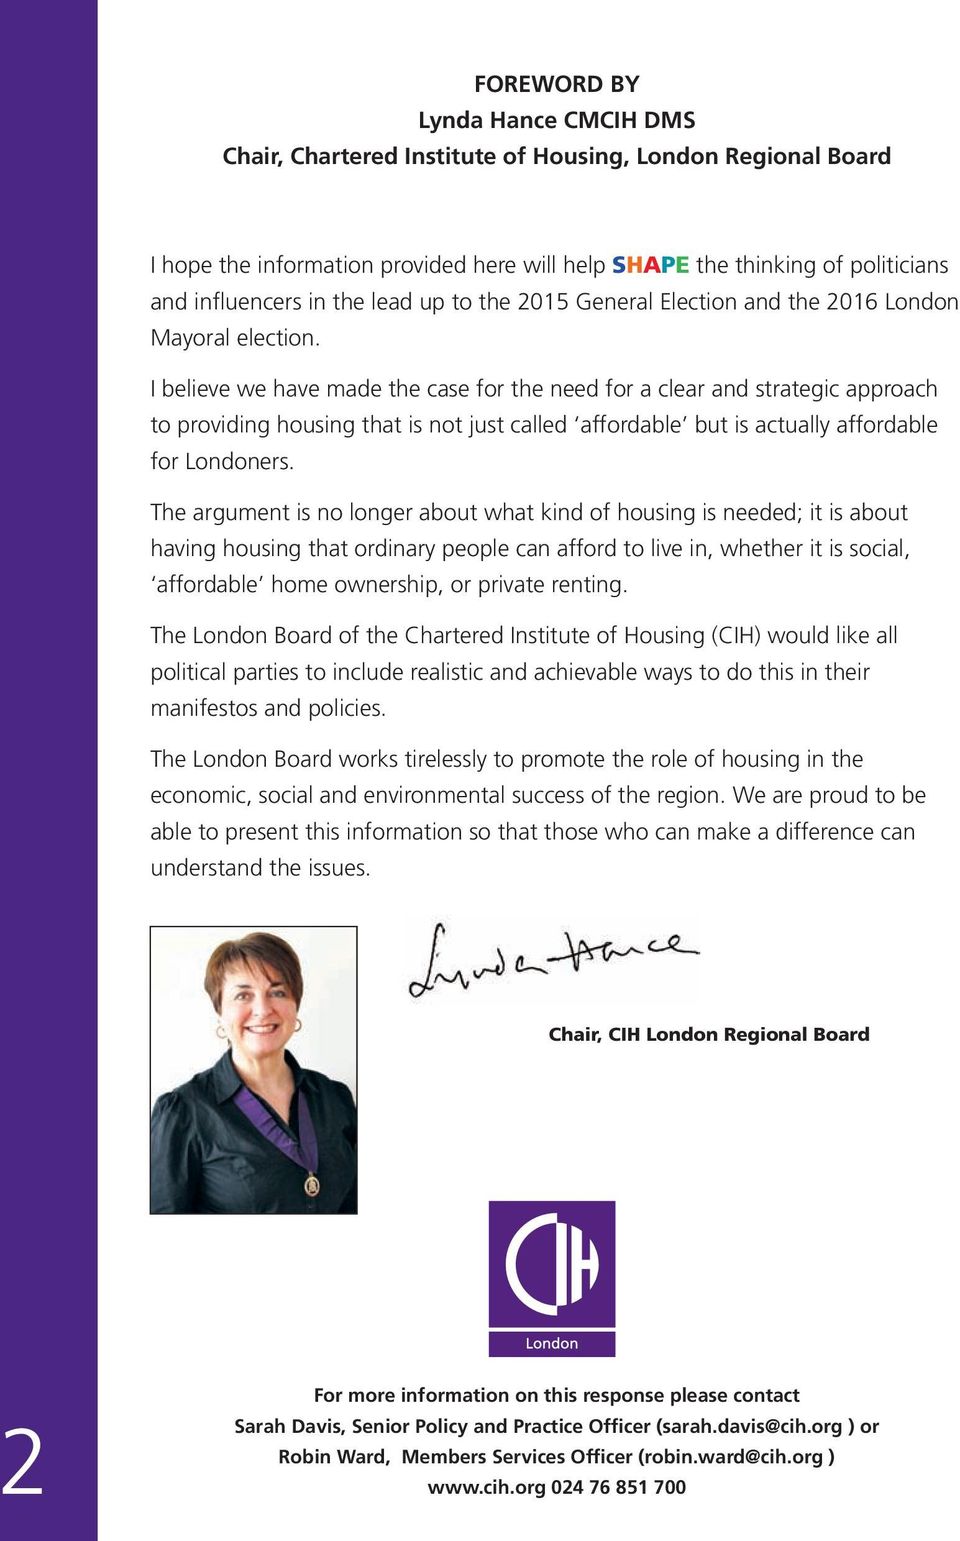 I believe we have made the case for the need for a clear and strategic approach to providing housing that is not just called affordable but is actually affordable for Londoners.